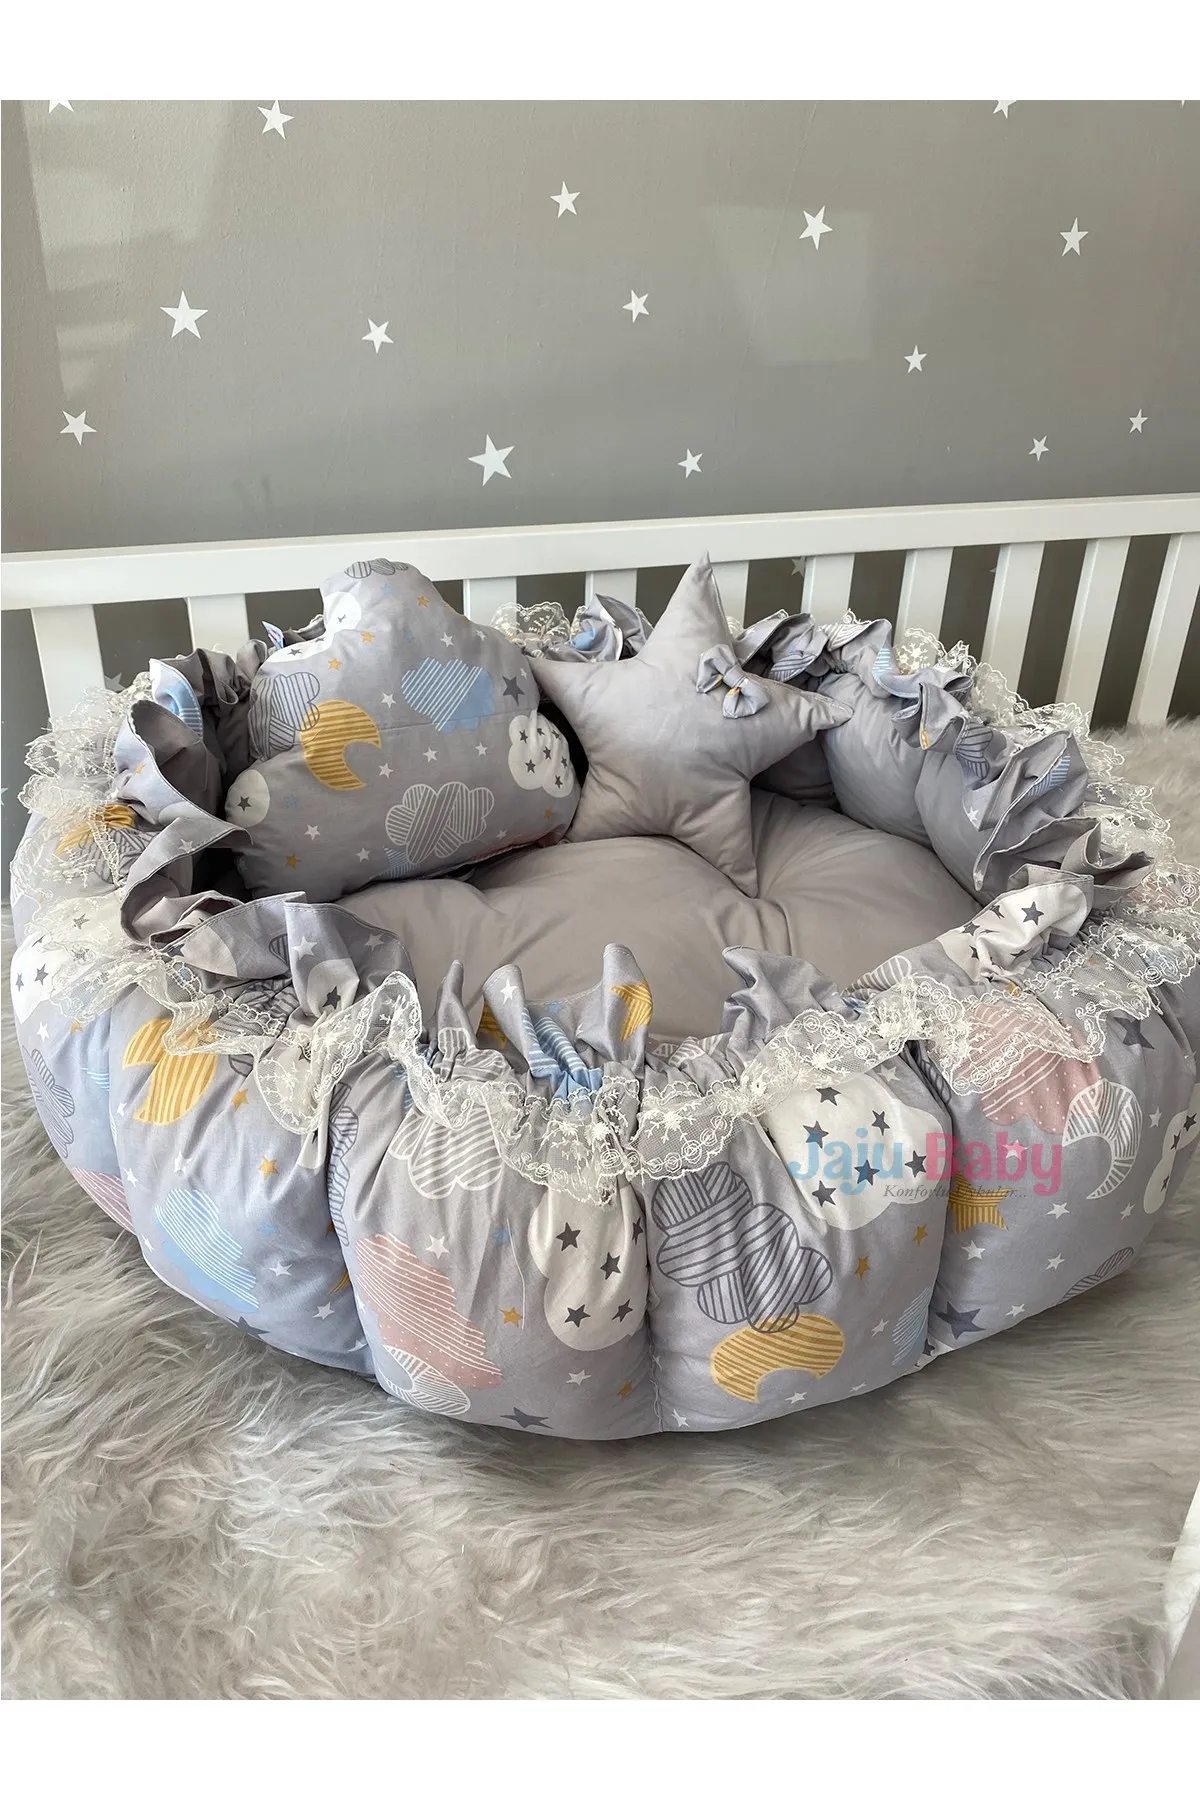 Jaju Baby Handmade Gray Mixed Cloud Pattern Design Retractable Play Mat Babynest Double-sided Use Baby Activity Portable Newborn